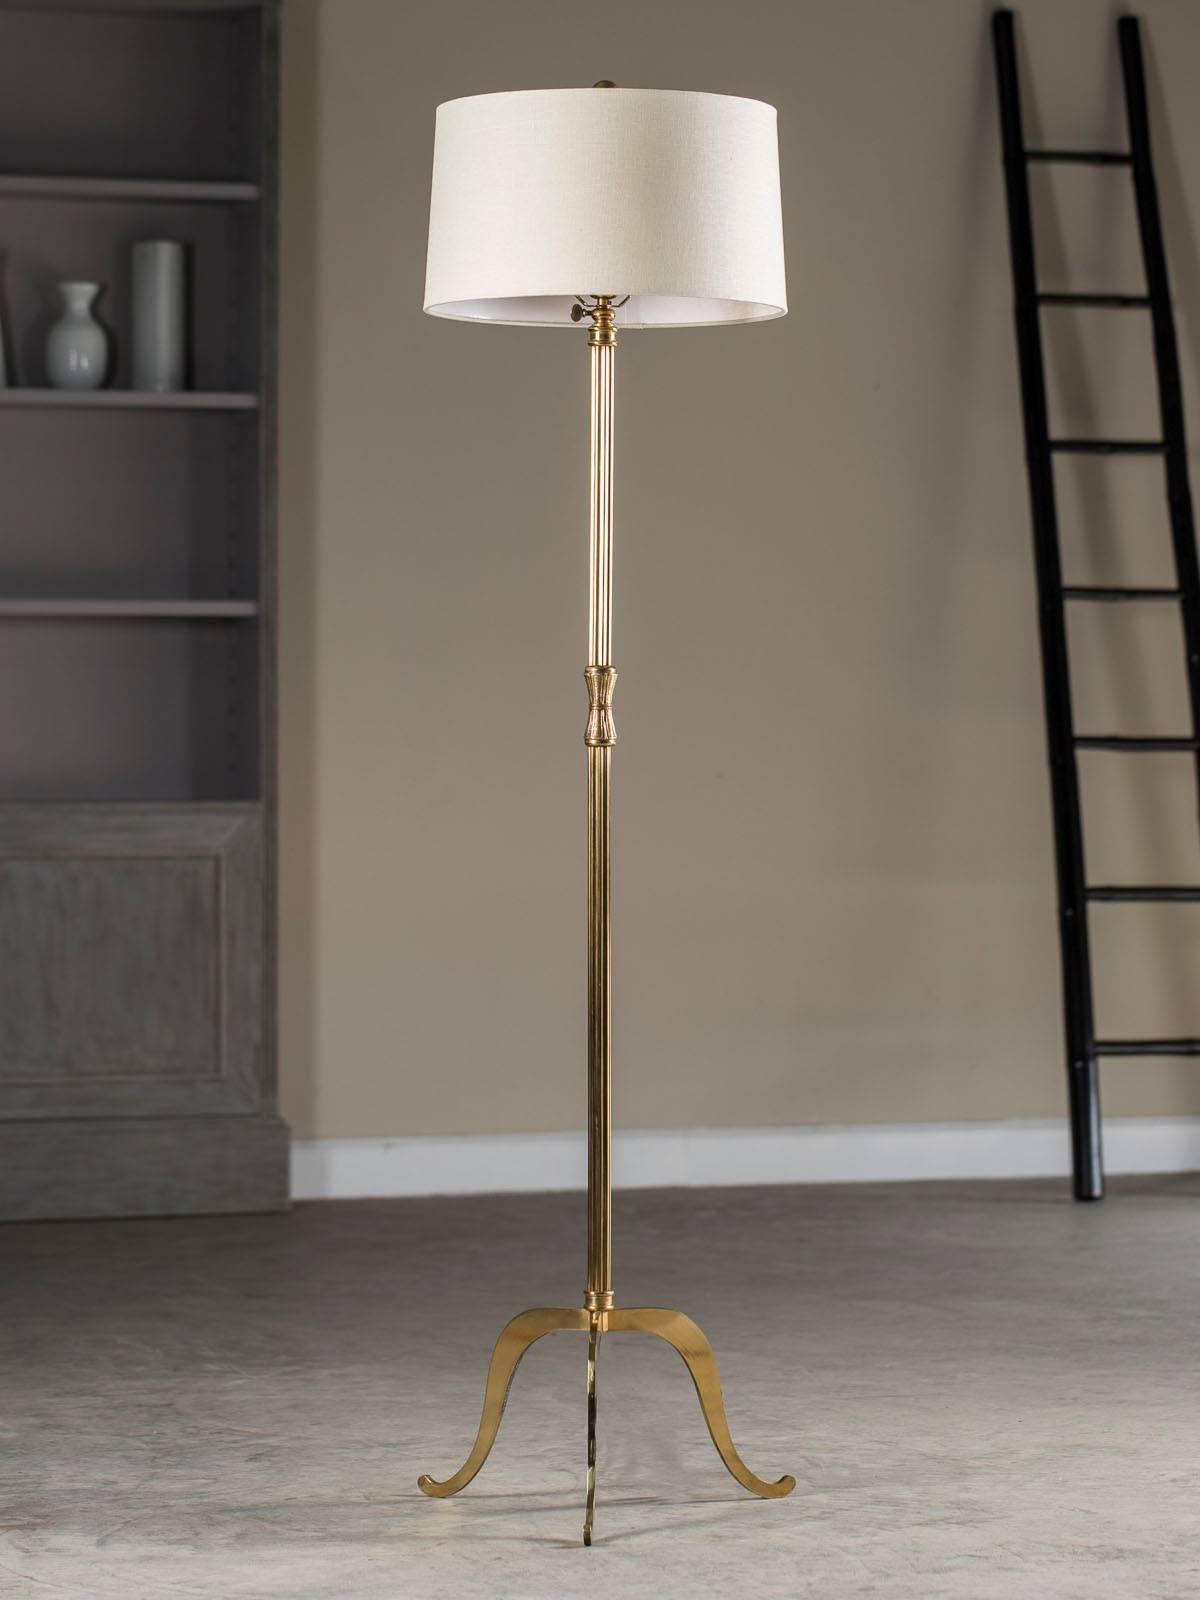 What legs. The handsome flat brass legs of this vintage French brass floor lamps circa 1940 are eye catching. The broad upper section narrows to a pert curve at the base near the floor on each of the three legs and throws attention on the simplicity